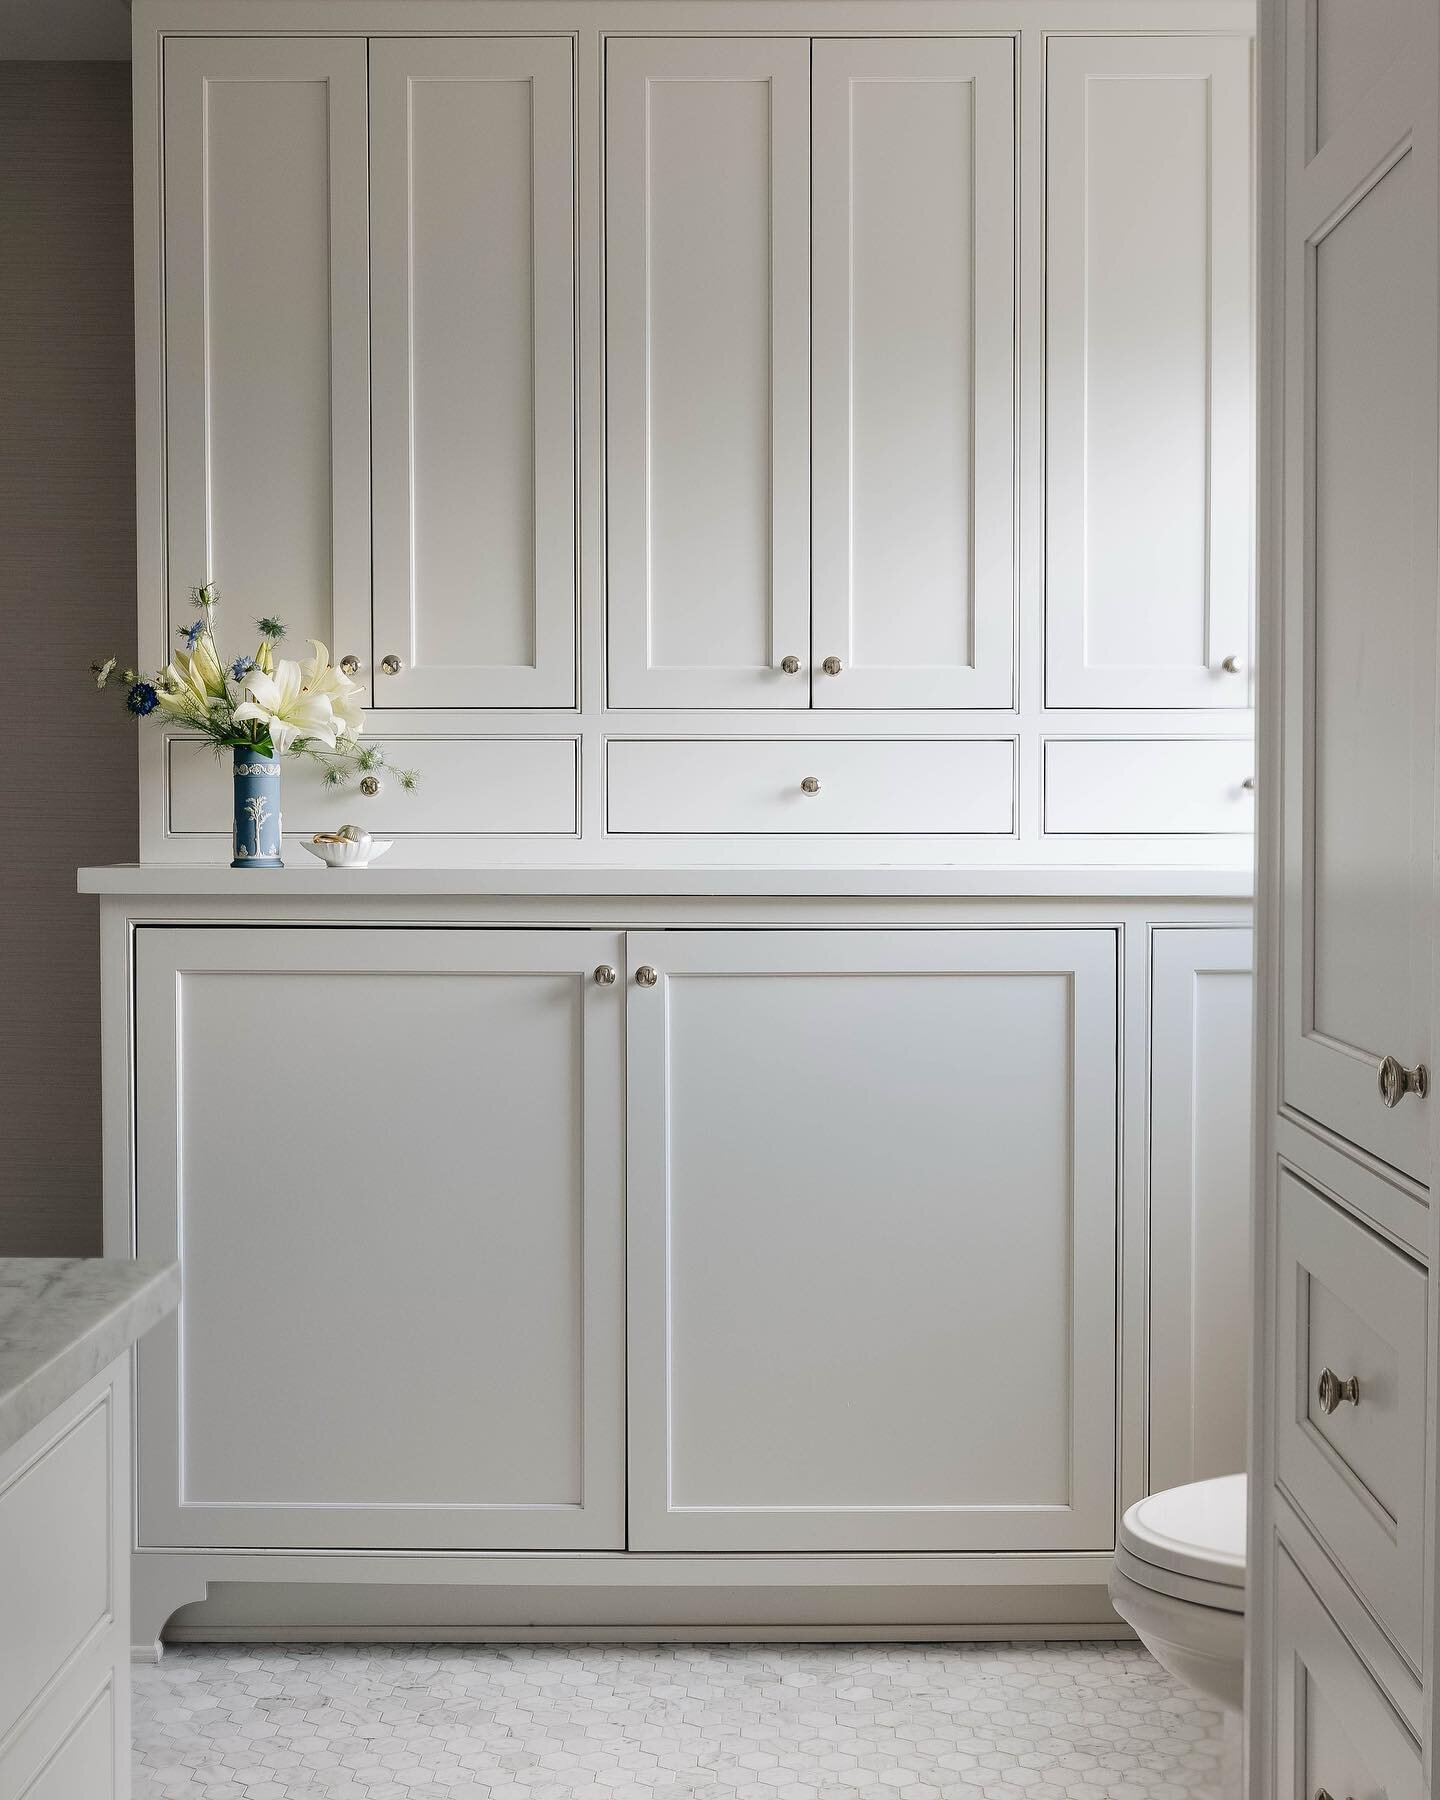 This historic home made us flex our creative solution muscles lots and we loved every second of it. (Swipe to see it in action) This bath needed to function as home storage, laundry and feel open since it was a space used constantly. Triple checking 